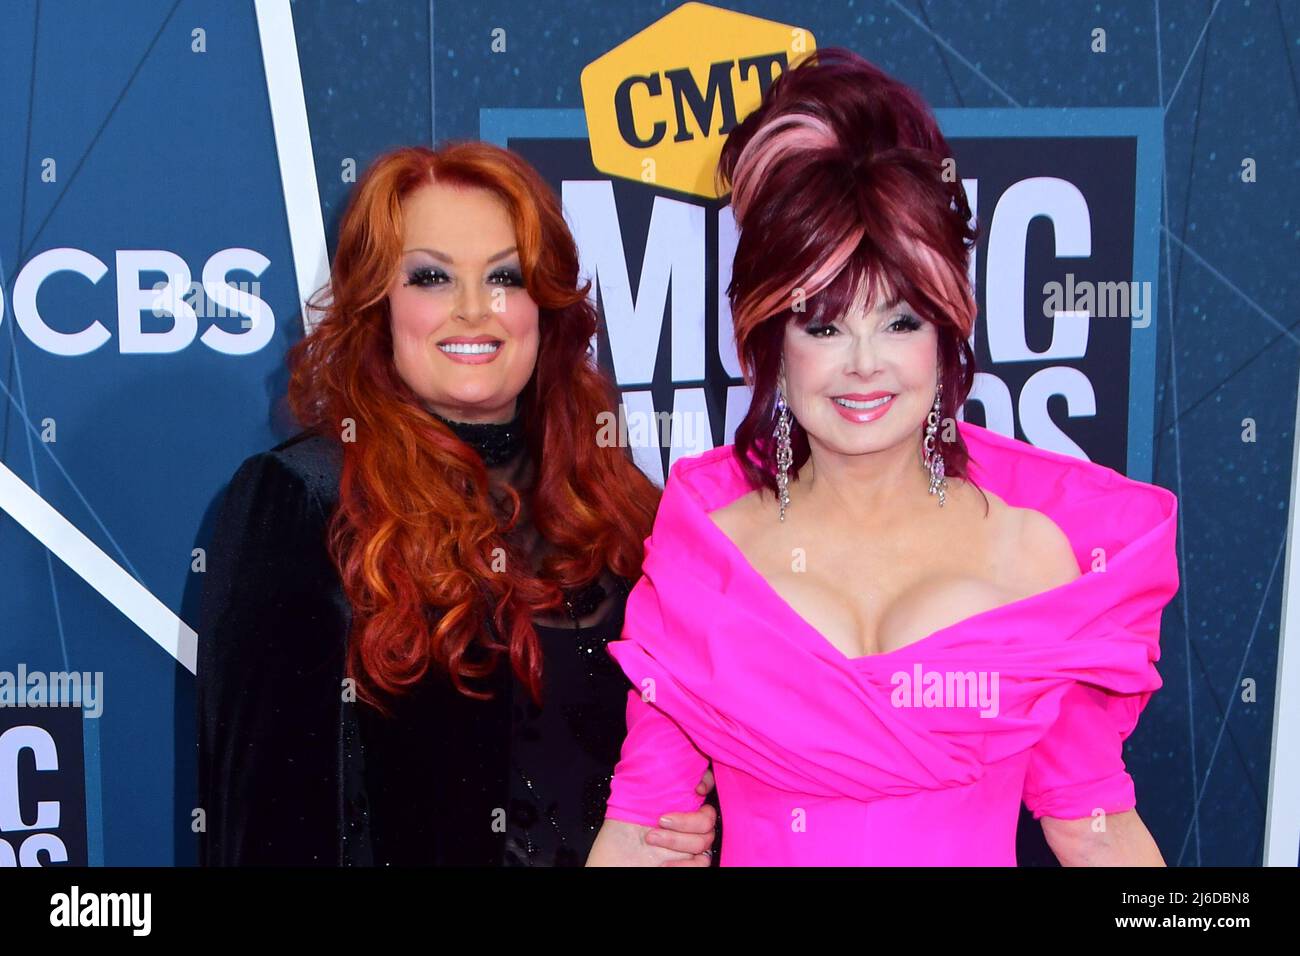 30 April 2022 - Grammy-award winning artist Naomi Judd of The Judds has died at 76. With her daughter Wynonna Judd, she formed the highly successful singing duo known as the Judds. As country music's most famous motherÃdaughter team, the Judds scored twenty top-10 hits (including fifteen at number one) and went undefeated for eight consecutive years at all three major country music awards shows. In addition, the duo won five Grammy Awards and a vast array of other awards and honors. As a songwriter, Judd also won a Grammy for country song of the year with the Judds' hit ''Love Can Build a Bri Stock Photo